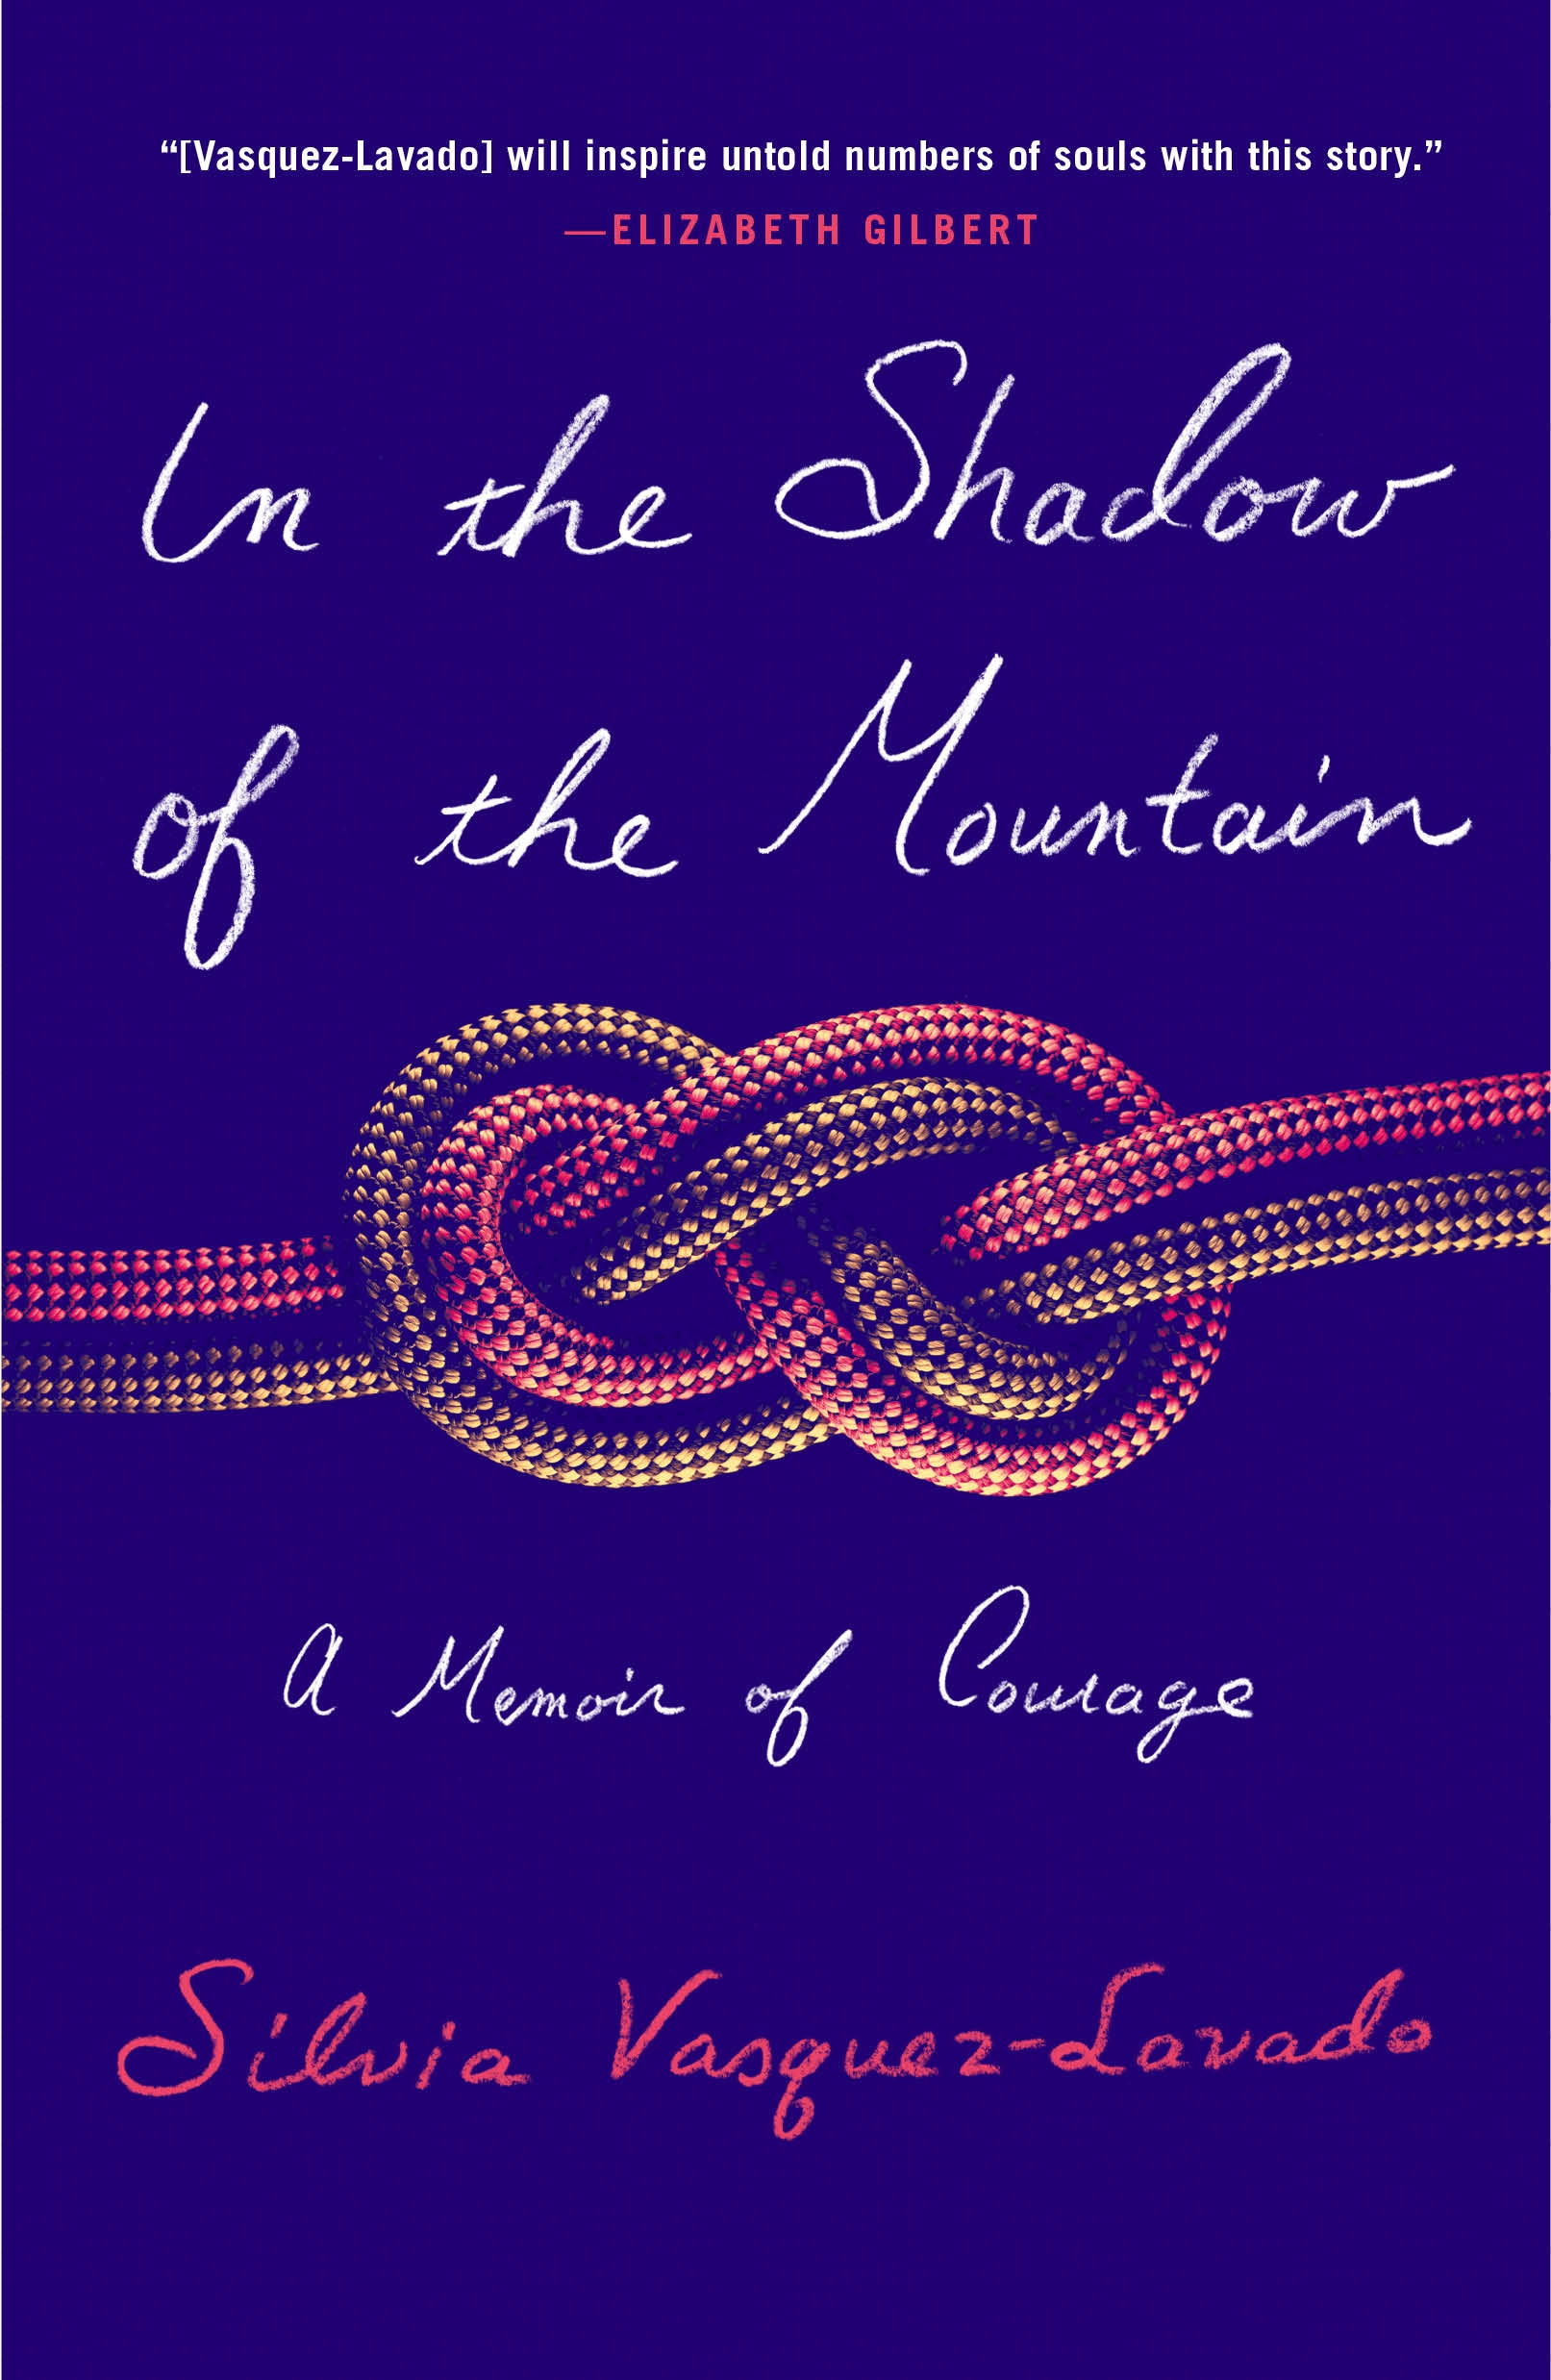 In the shadow of the mountain : a memoir of courage